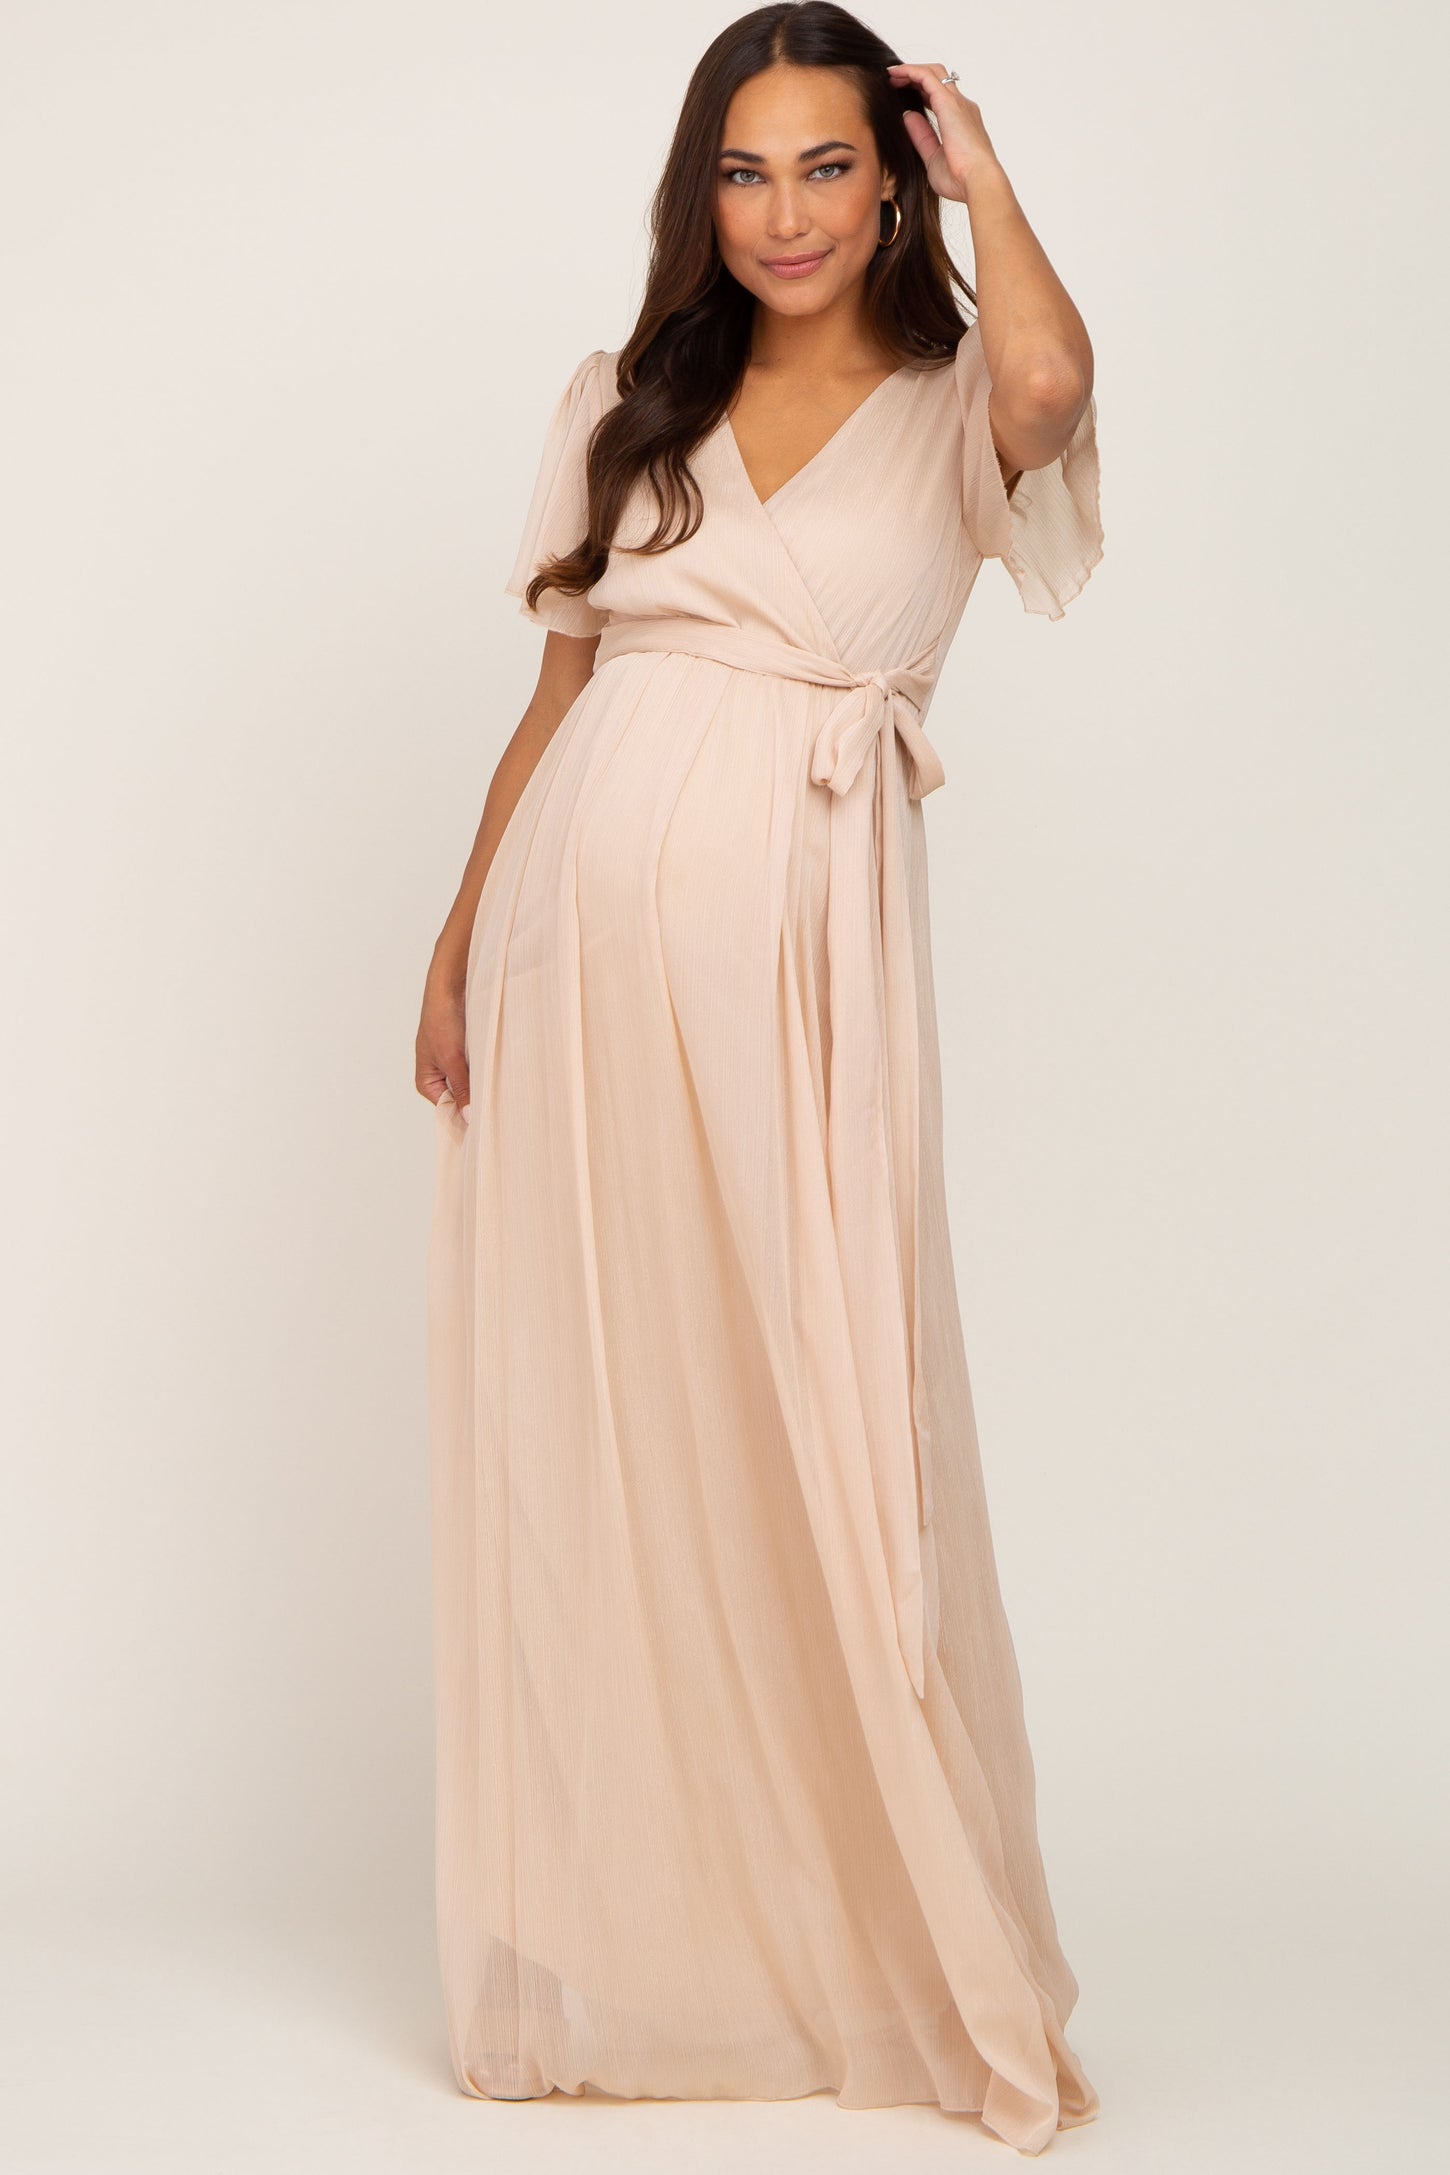 Cream Floral Shimmer Lace-Up Maternity Maxi Dress– PinkBlush